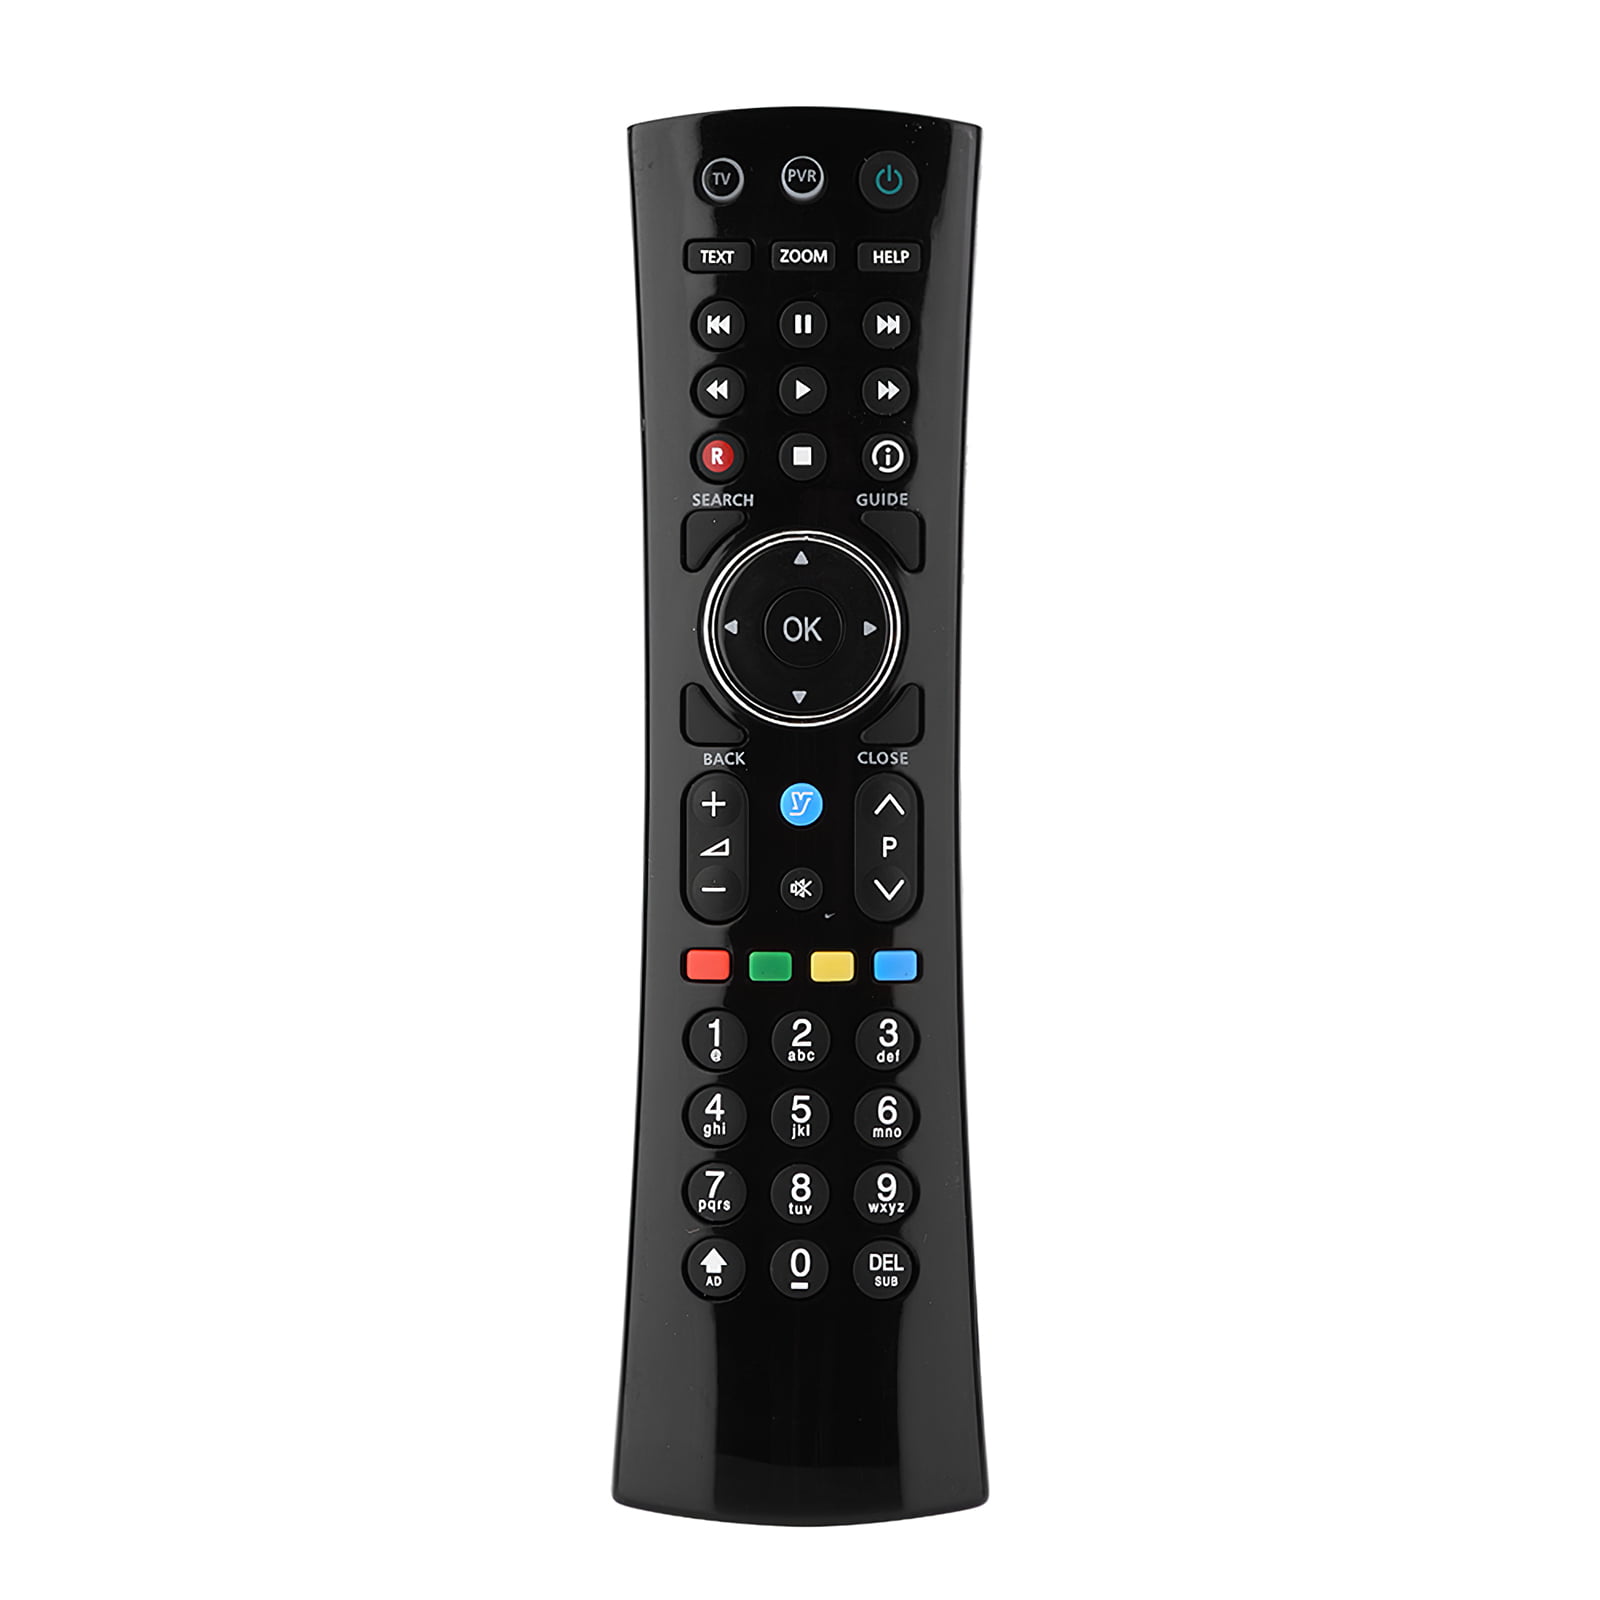 RM Series Replacement Remote Control for HUMAX RM-L08